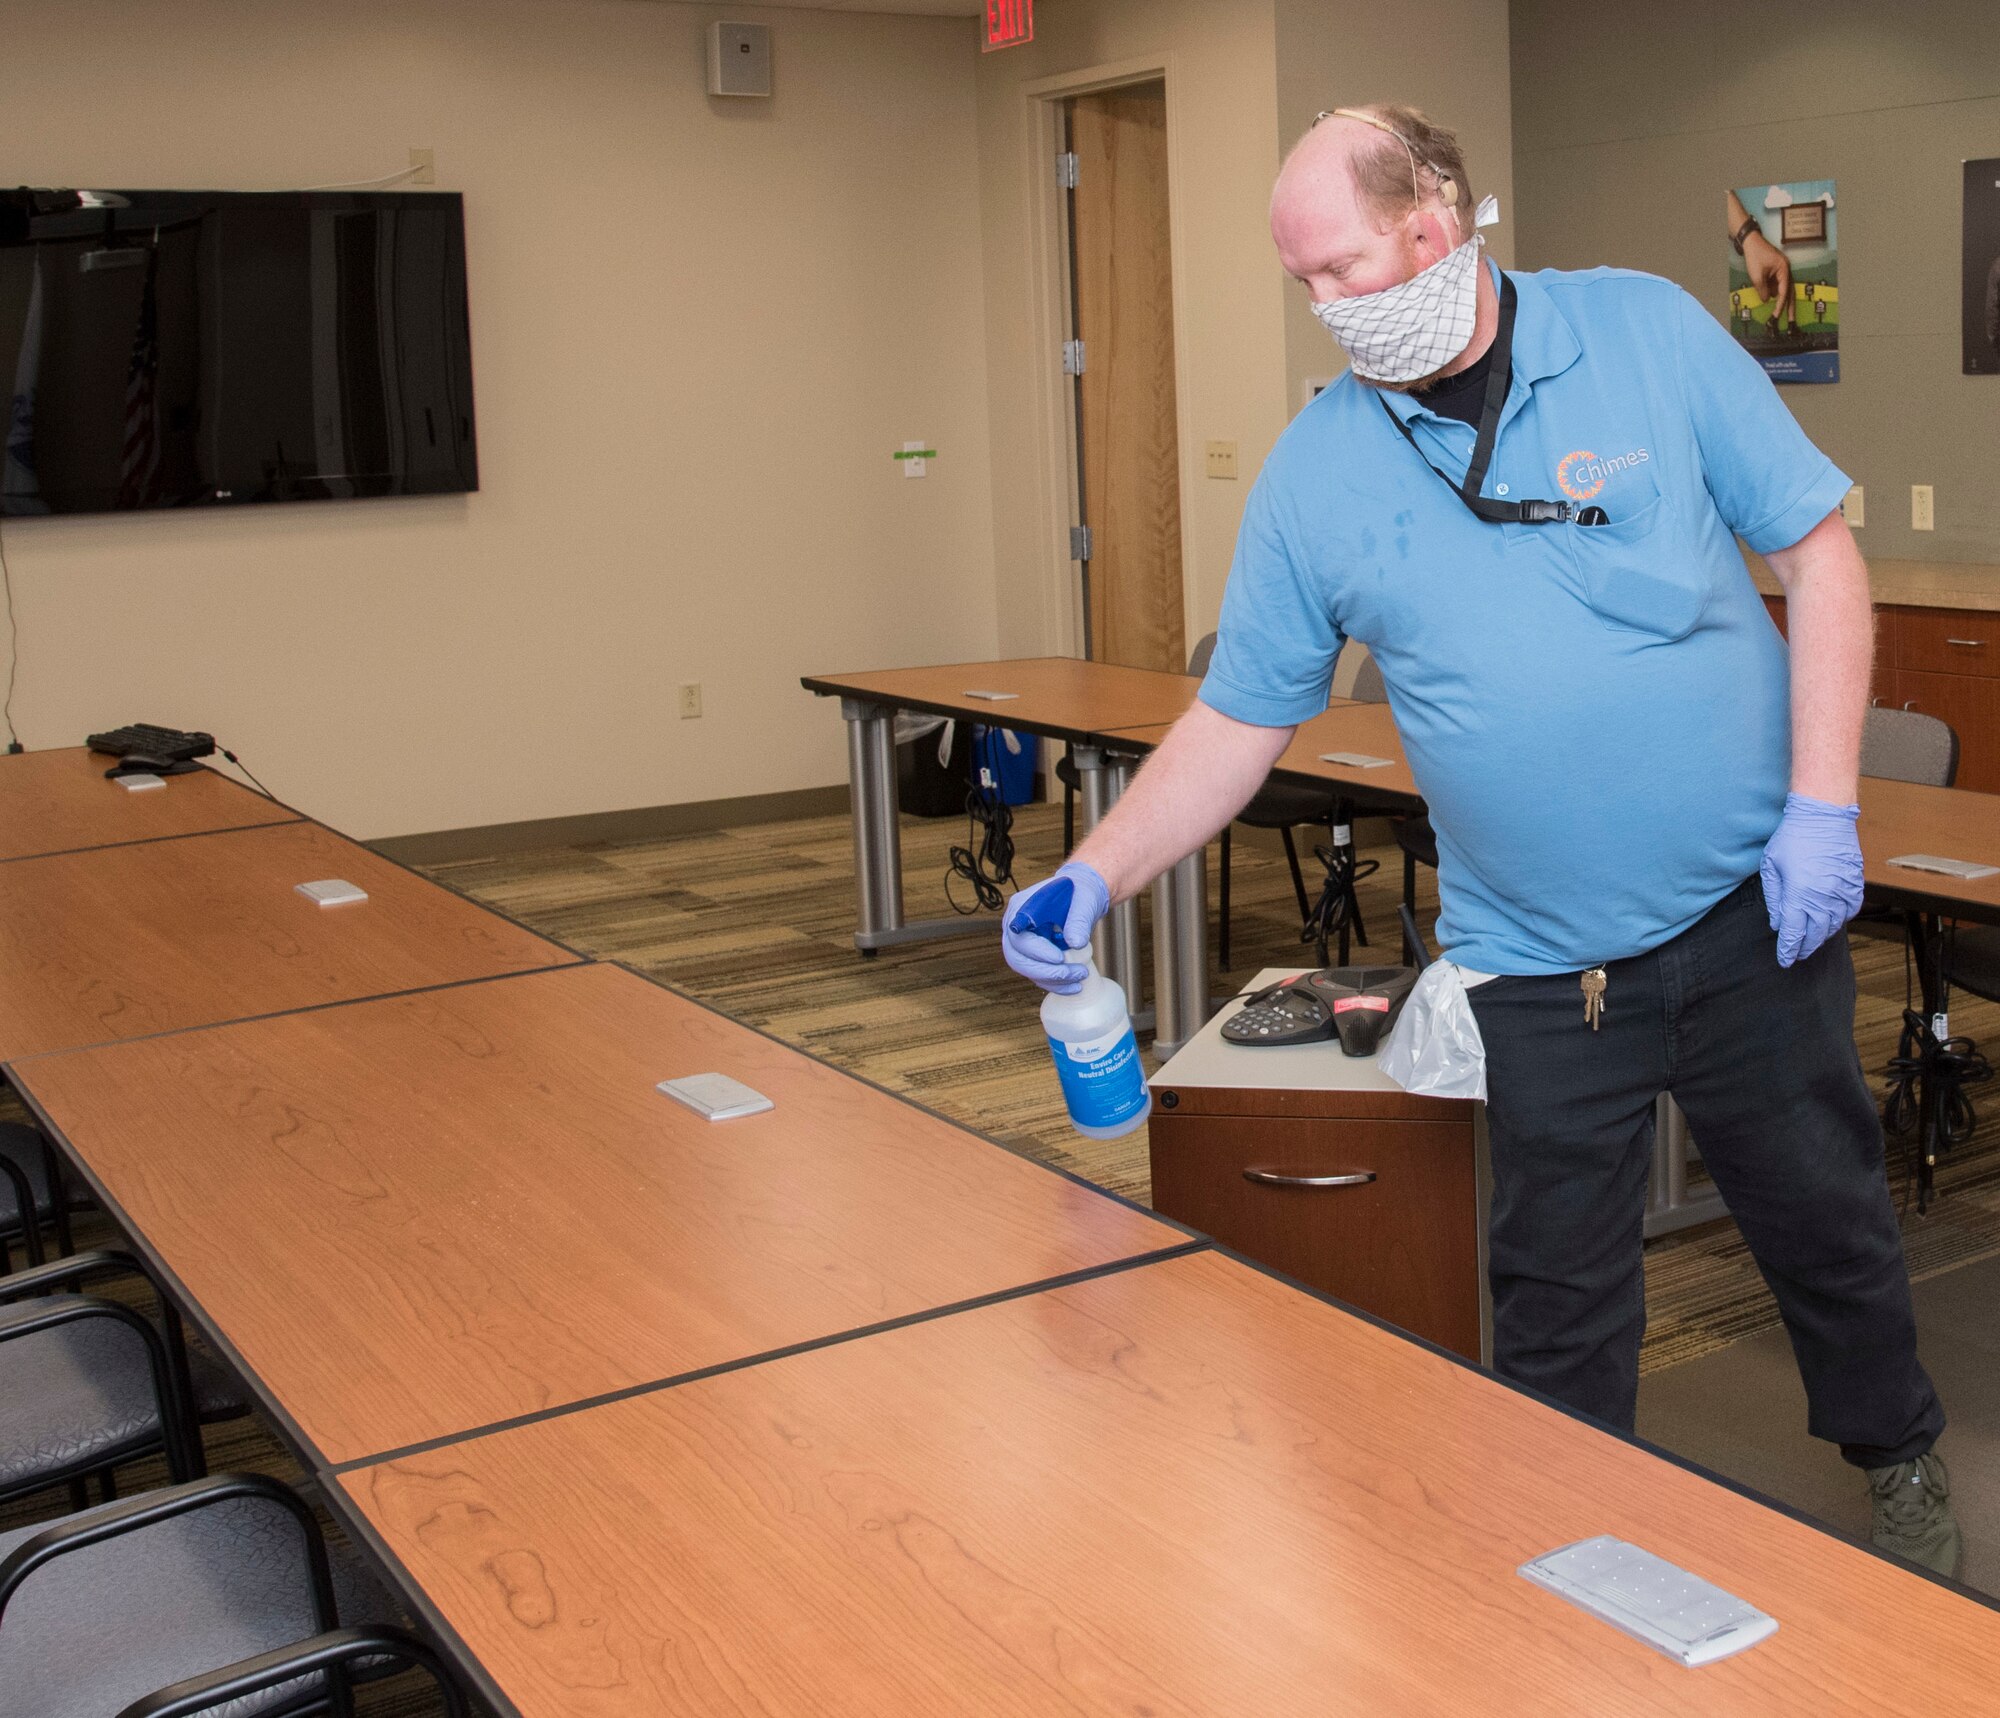 Seth Thomas, Chimes custodian, cleans the AFMES conference room April 9, 2020. Chimes personnel have stepped up their cleaning efforts in the face of COVID-19, taking extra precautions to clean surfaces such as conference room tables by spraying them down with a bleach cleaning solution. (U.S. Air Force photo by Tech. Sgt. Nicole Leidholm)